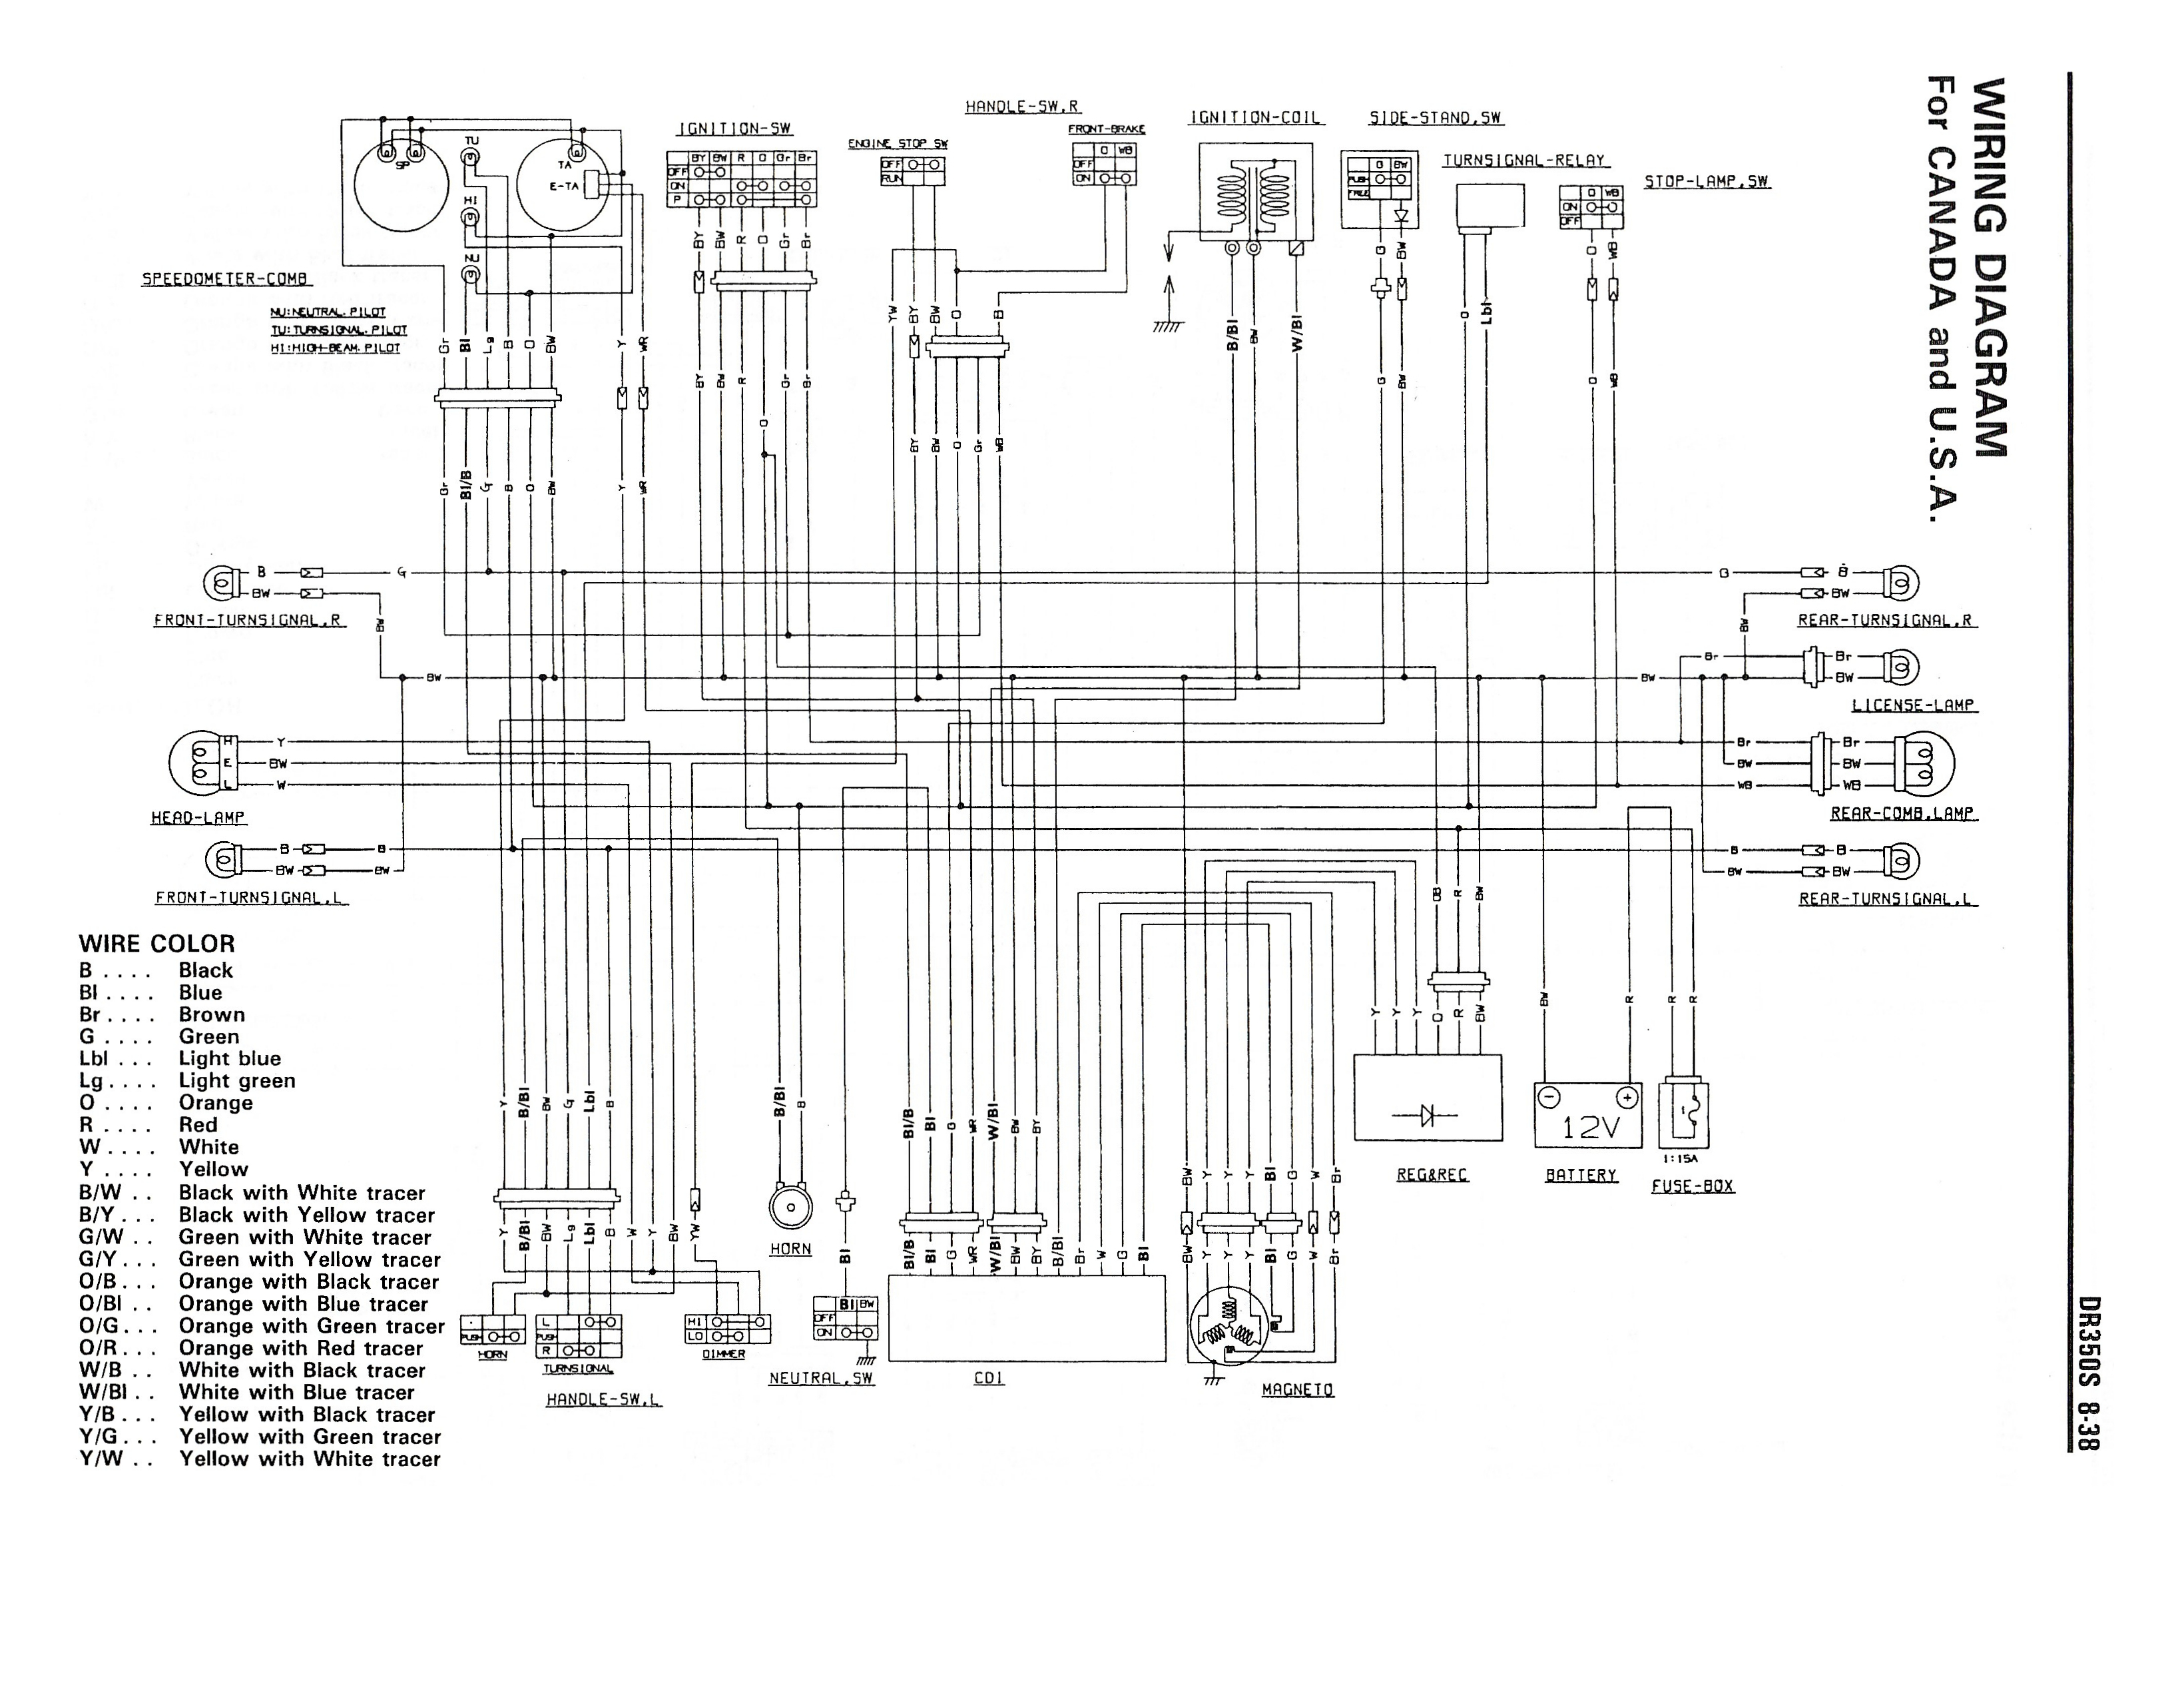 Wiring diagram for the DR350 S (1990 and later models - Canada, USA)